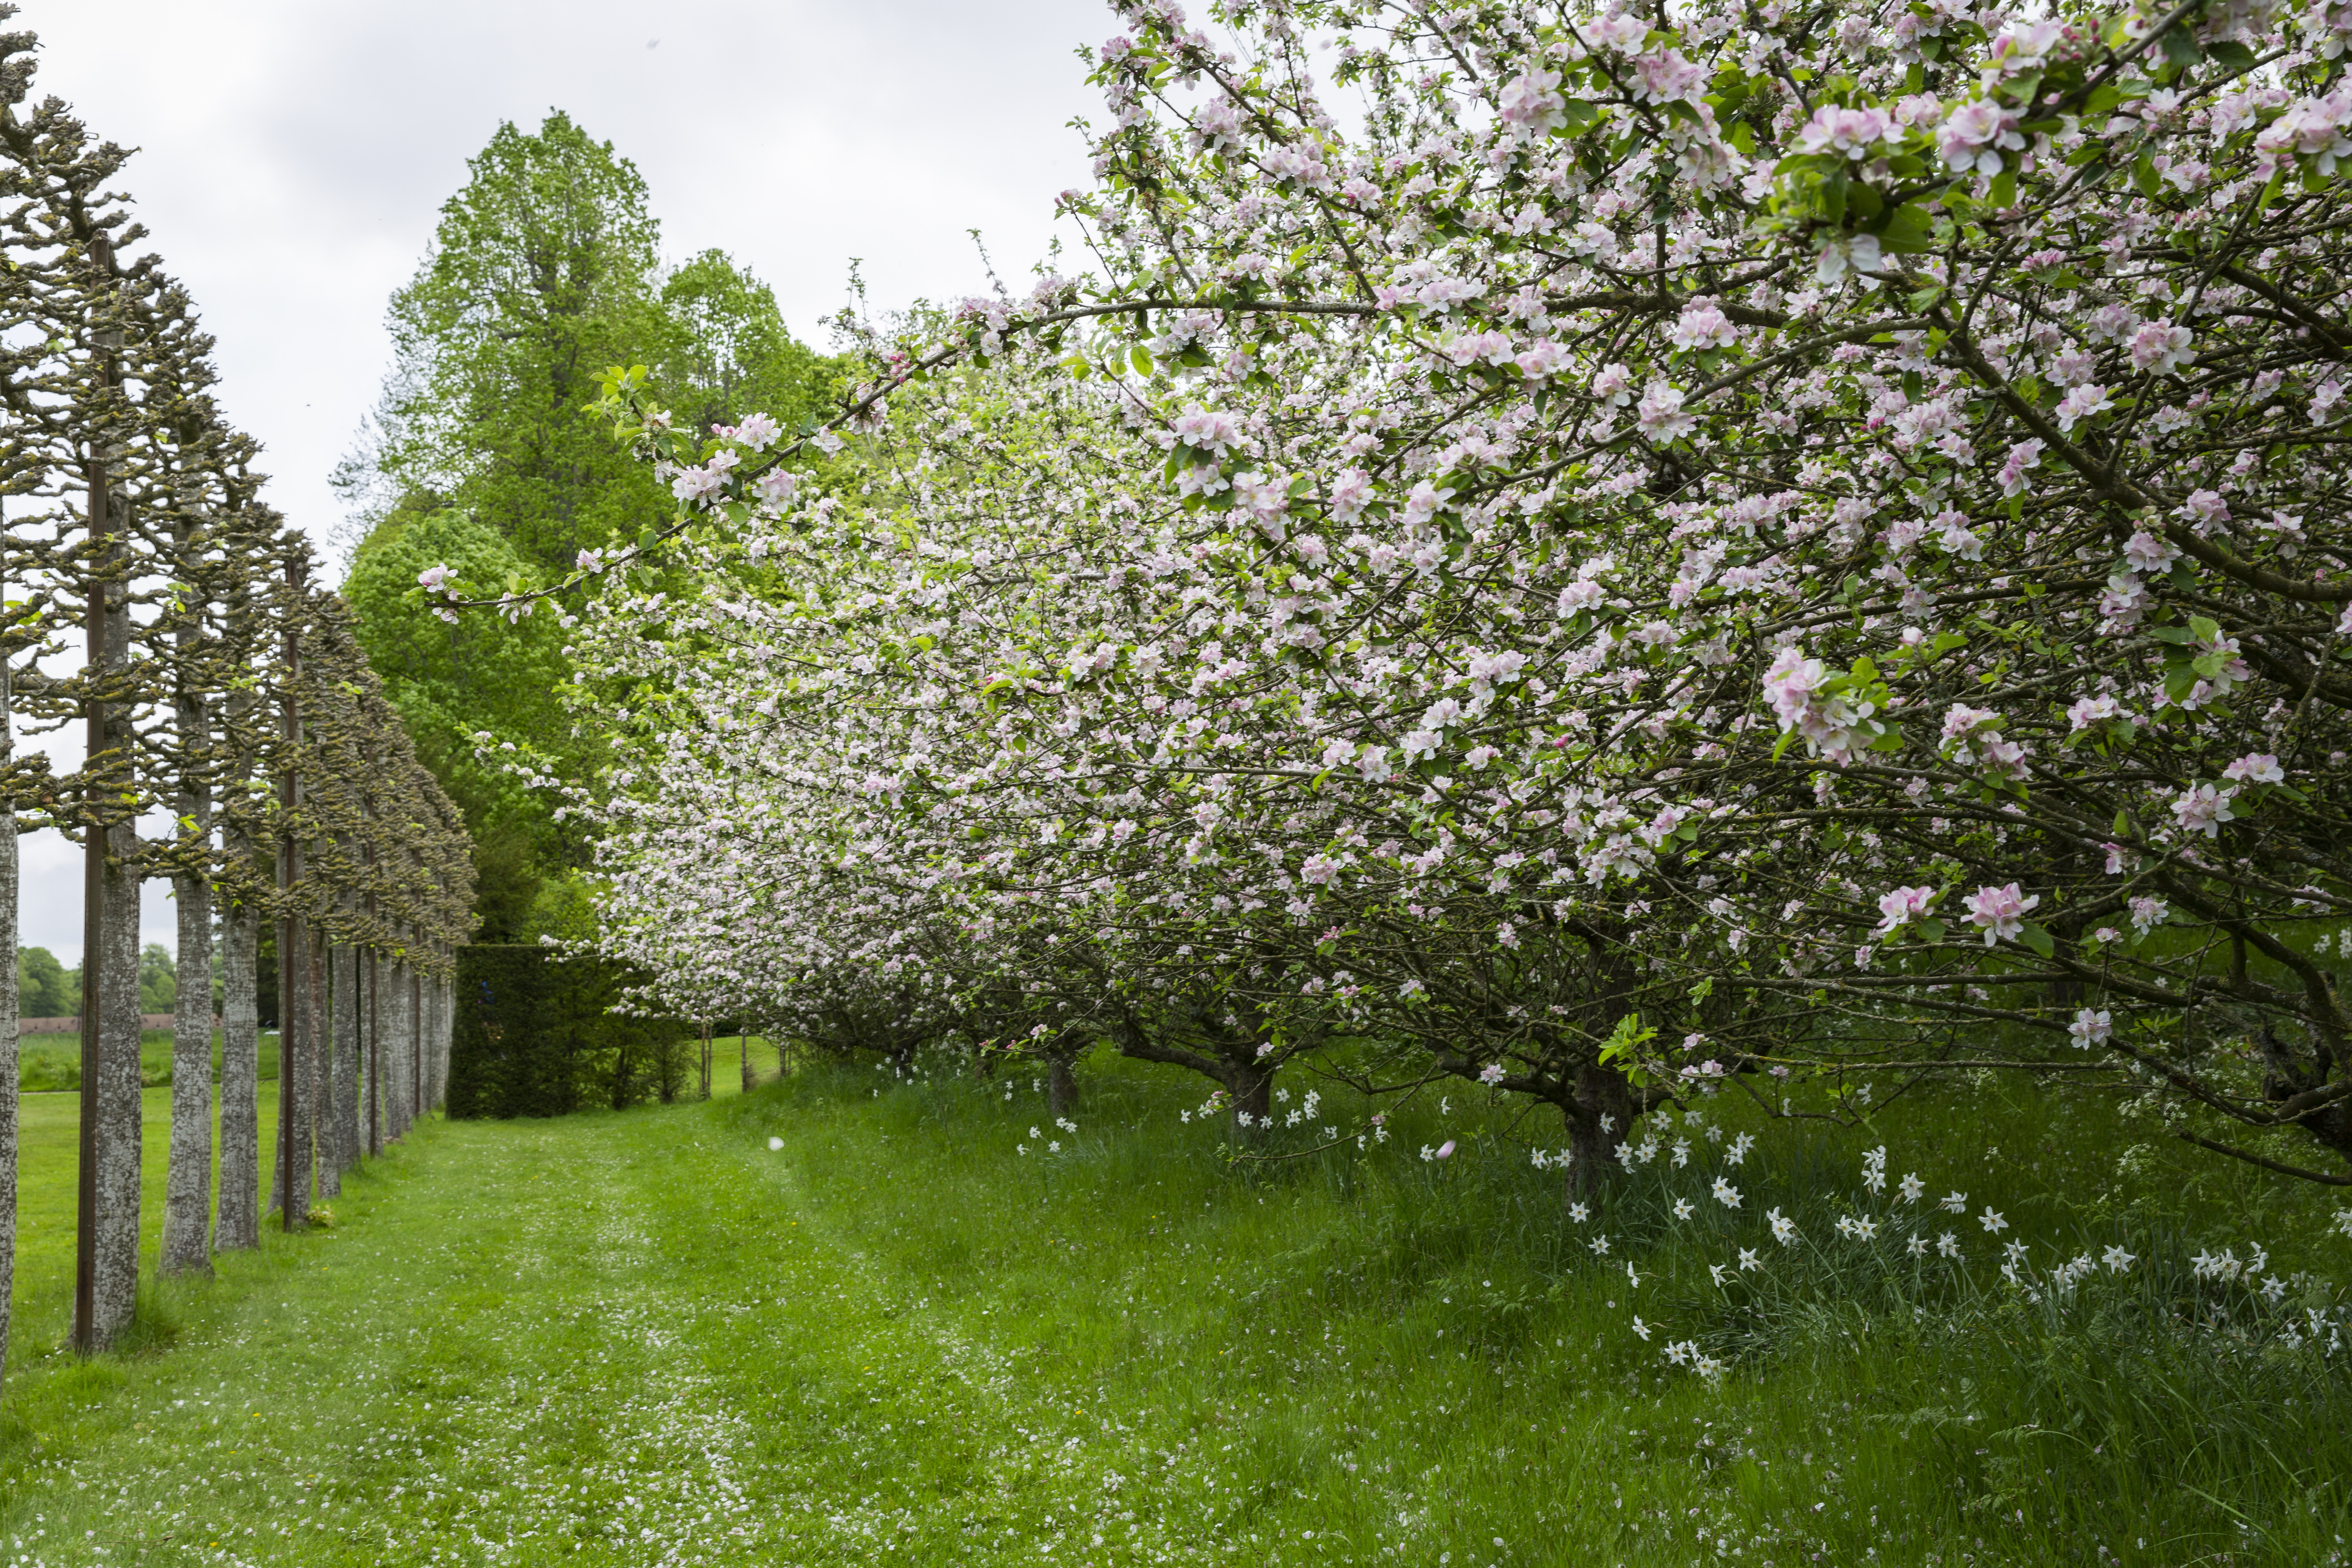 A row of apple trees in blossom at Erddig, Wrexham